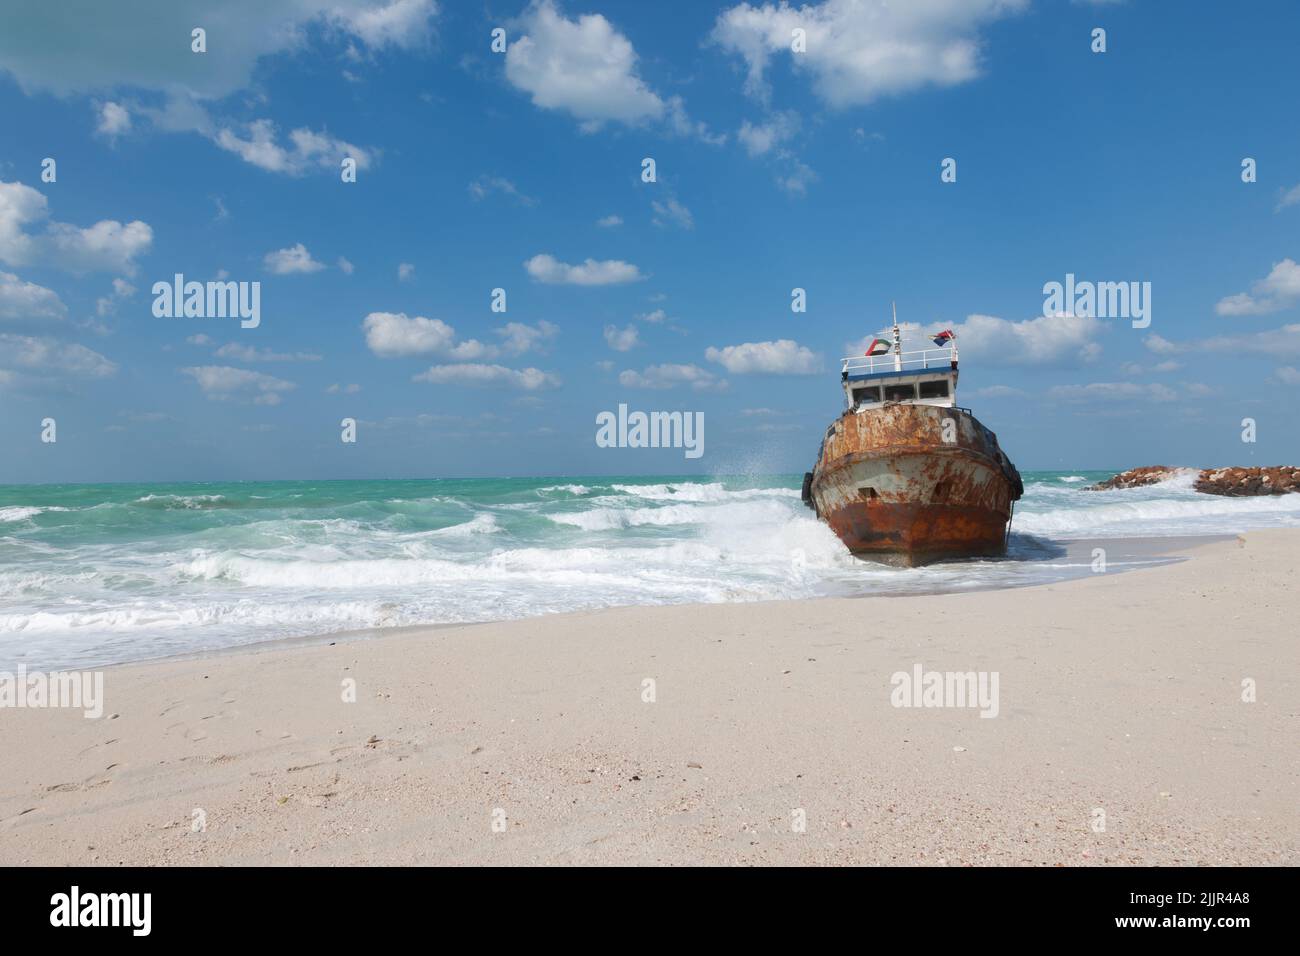 Stranded rusty fisherman boat photographed at the coast of Ajman Emirate on sunny winter day. Sea, sand, blue sky with clouds at background. Stock Photo